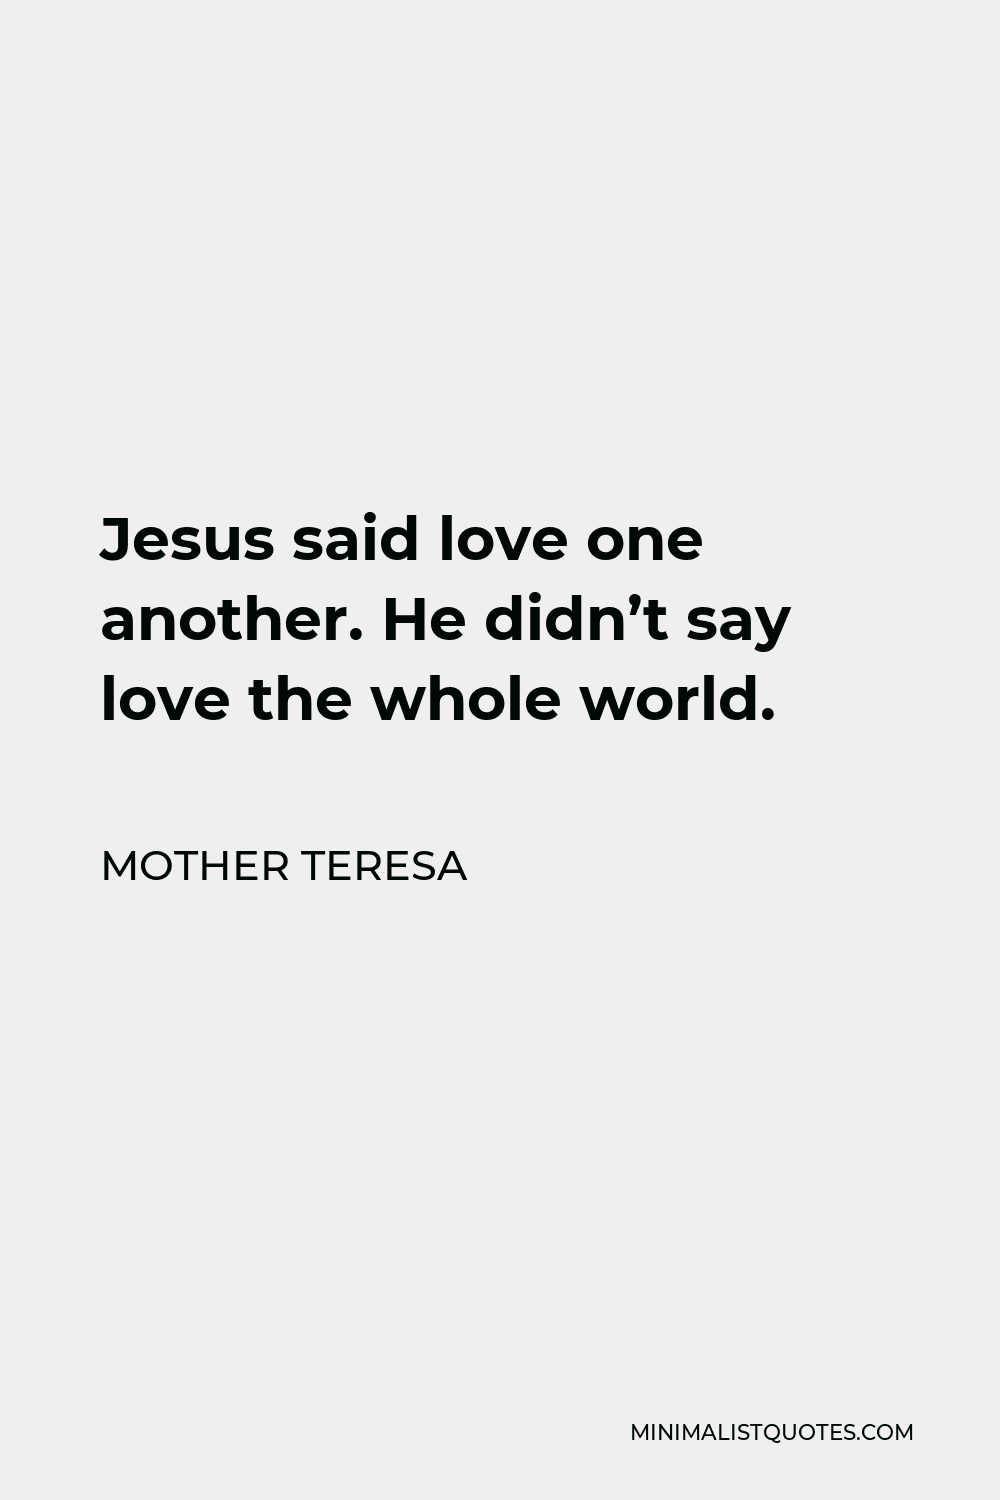 Mother Teresa Quote - Jesus said love one another. He didn’t say love the whole world.